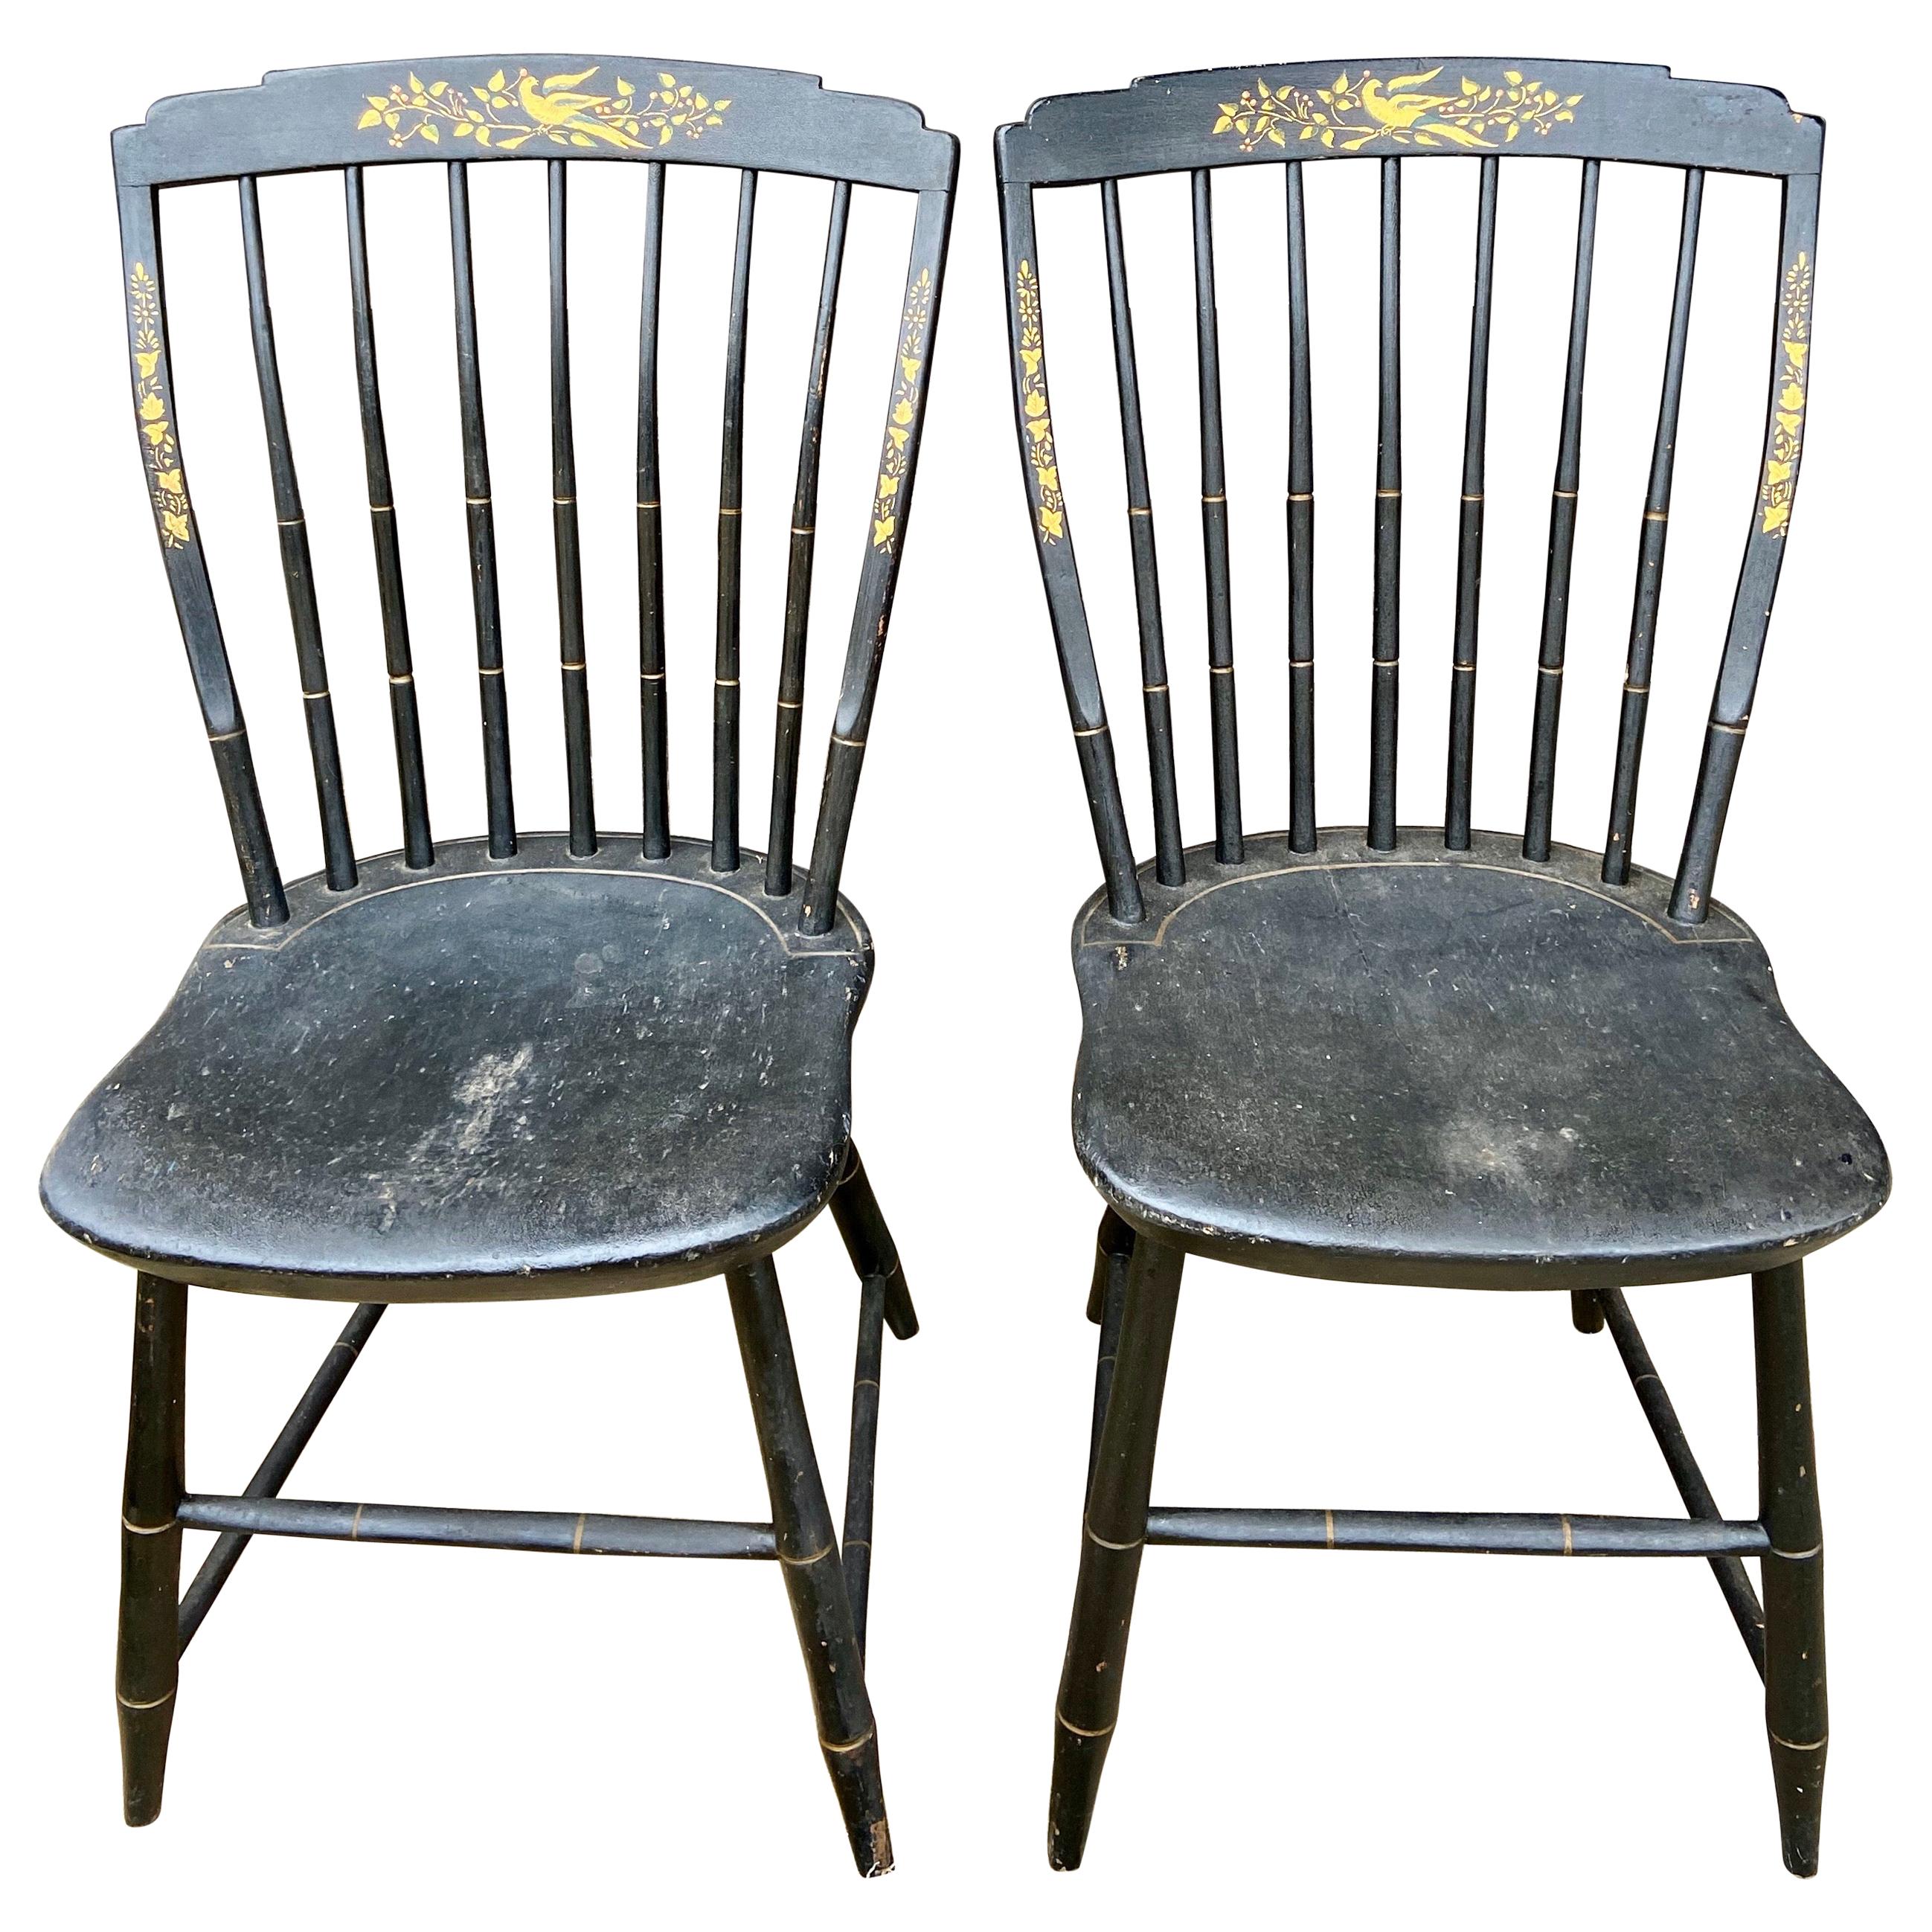 American Windsor Hickory Oakwood Handpainted Stenciled Chairs Black and Gold For Sale